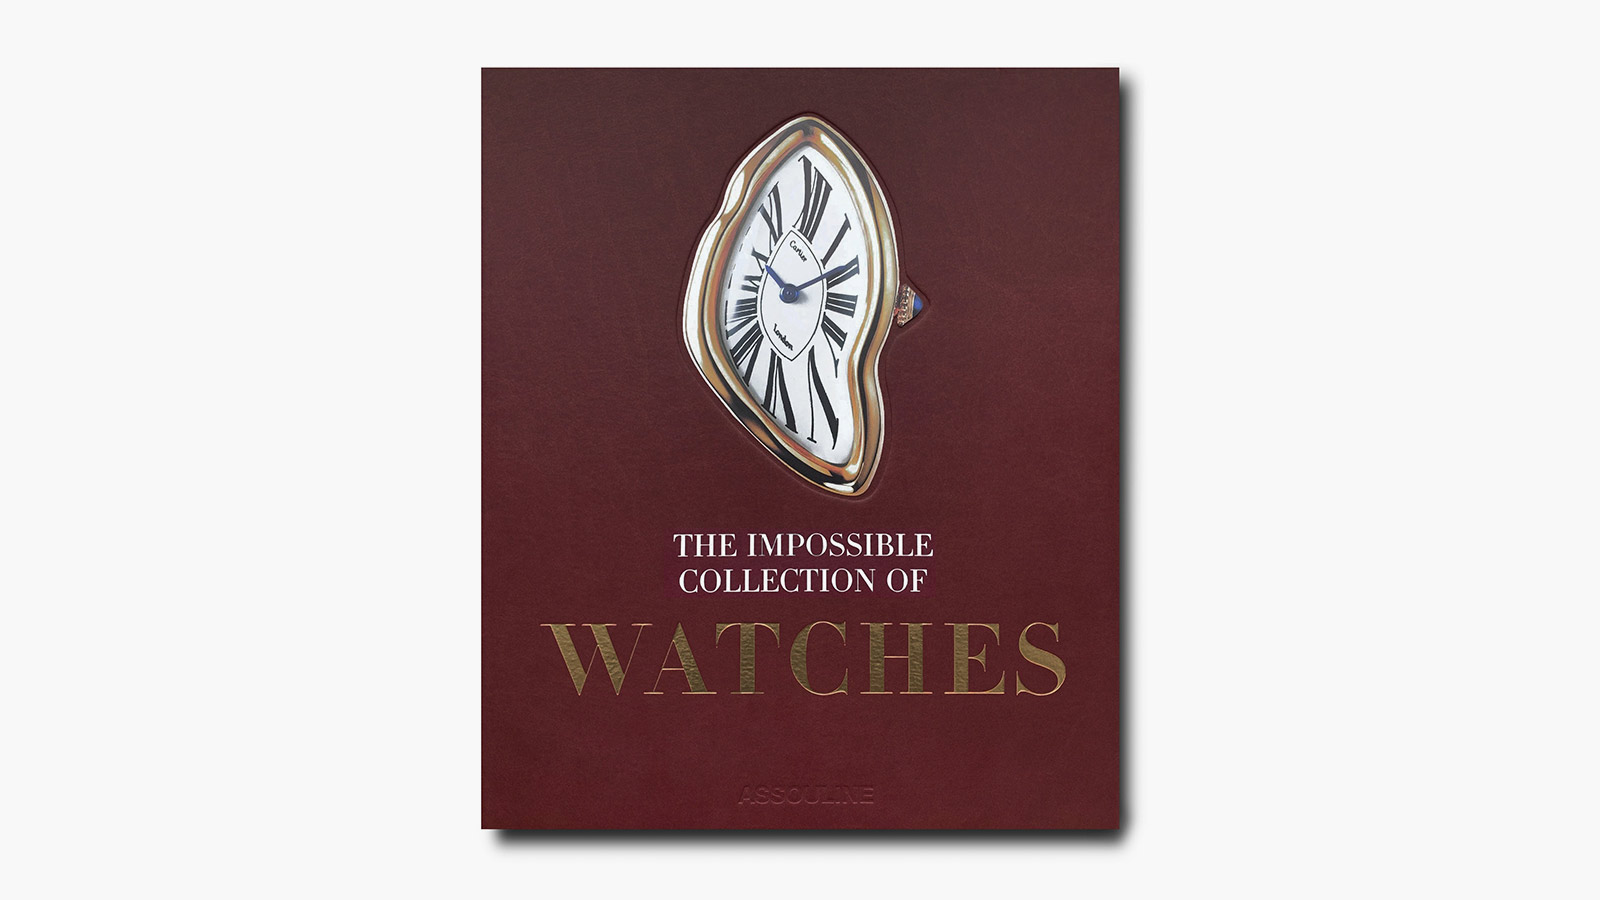 'The Impossible Collection of Watches 2nd Edition' by Nicholas Foulkes